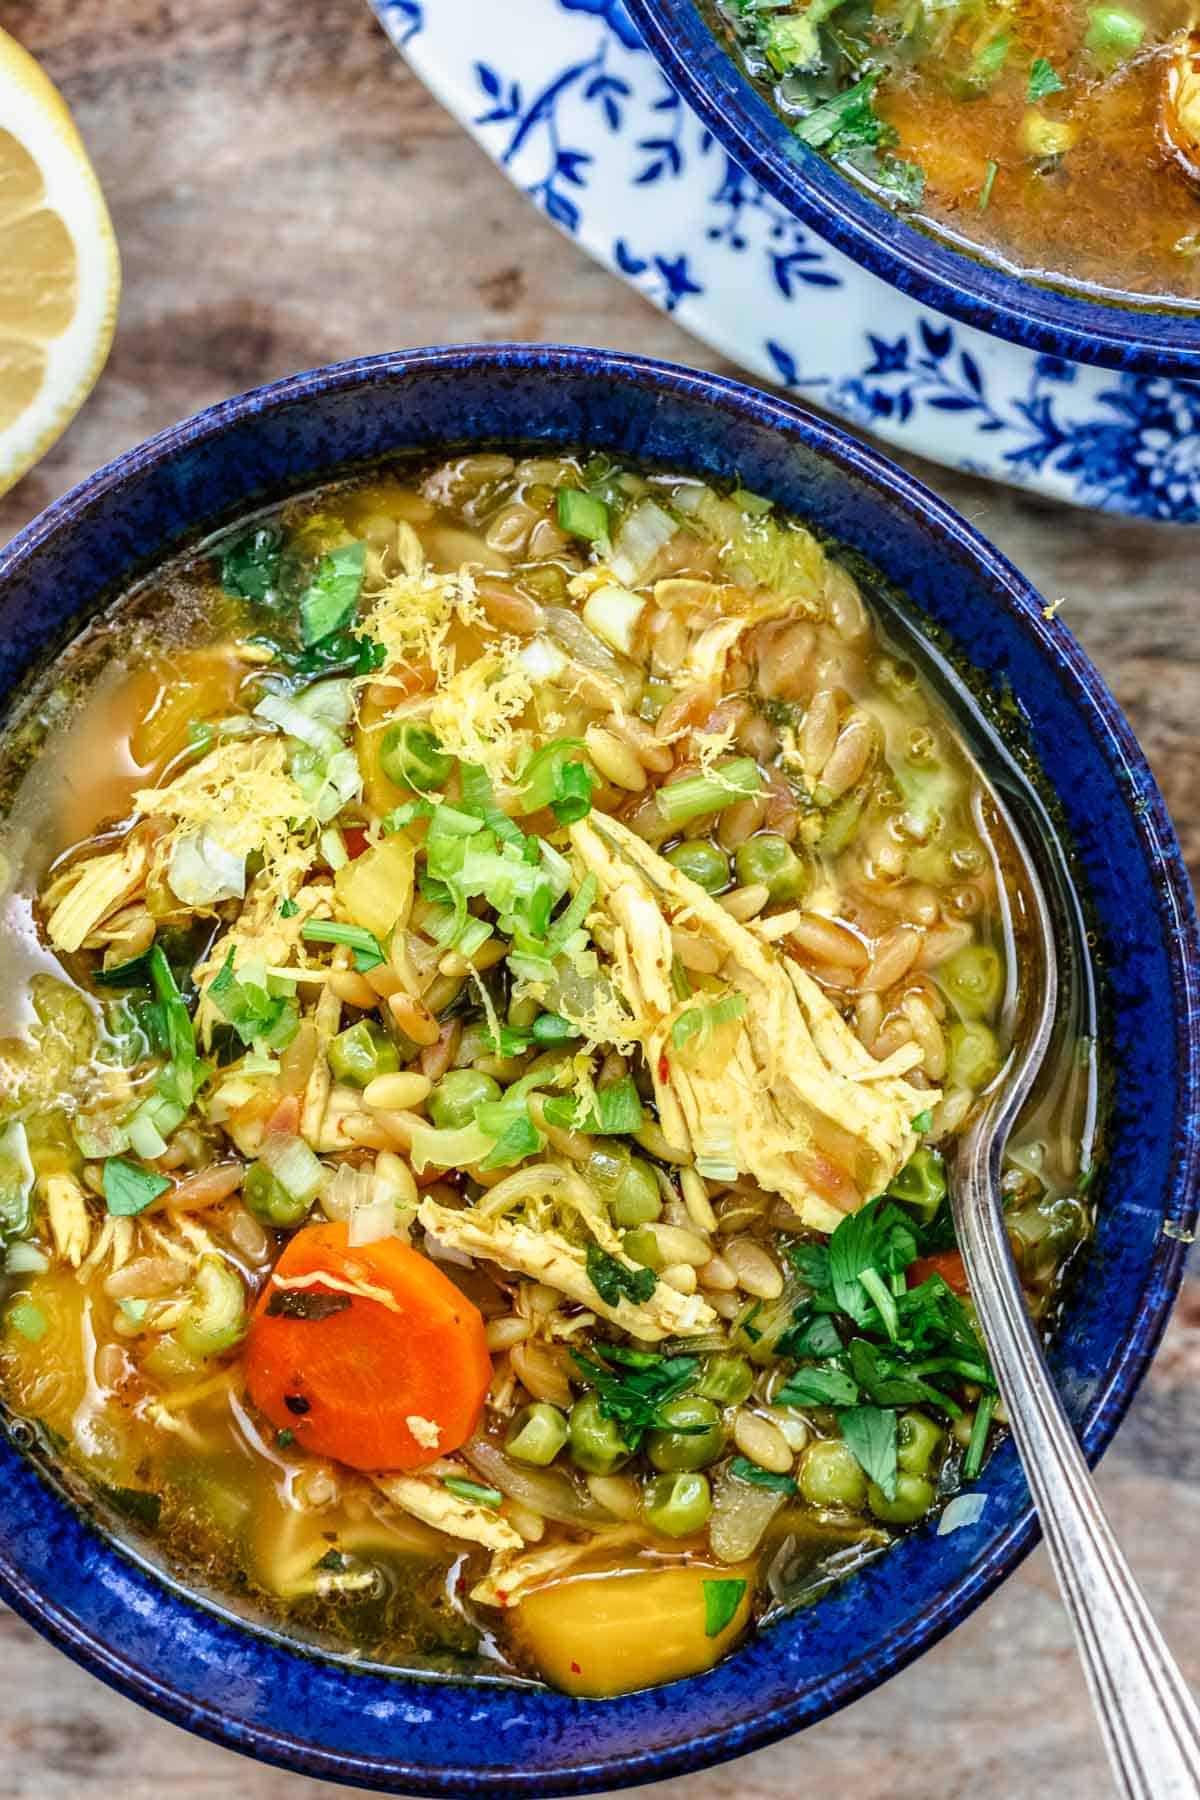 Lemon chicken orzo soup in a blue serving bowl with a spoon.